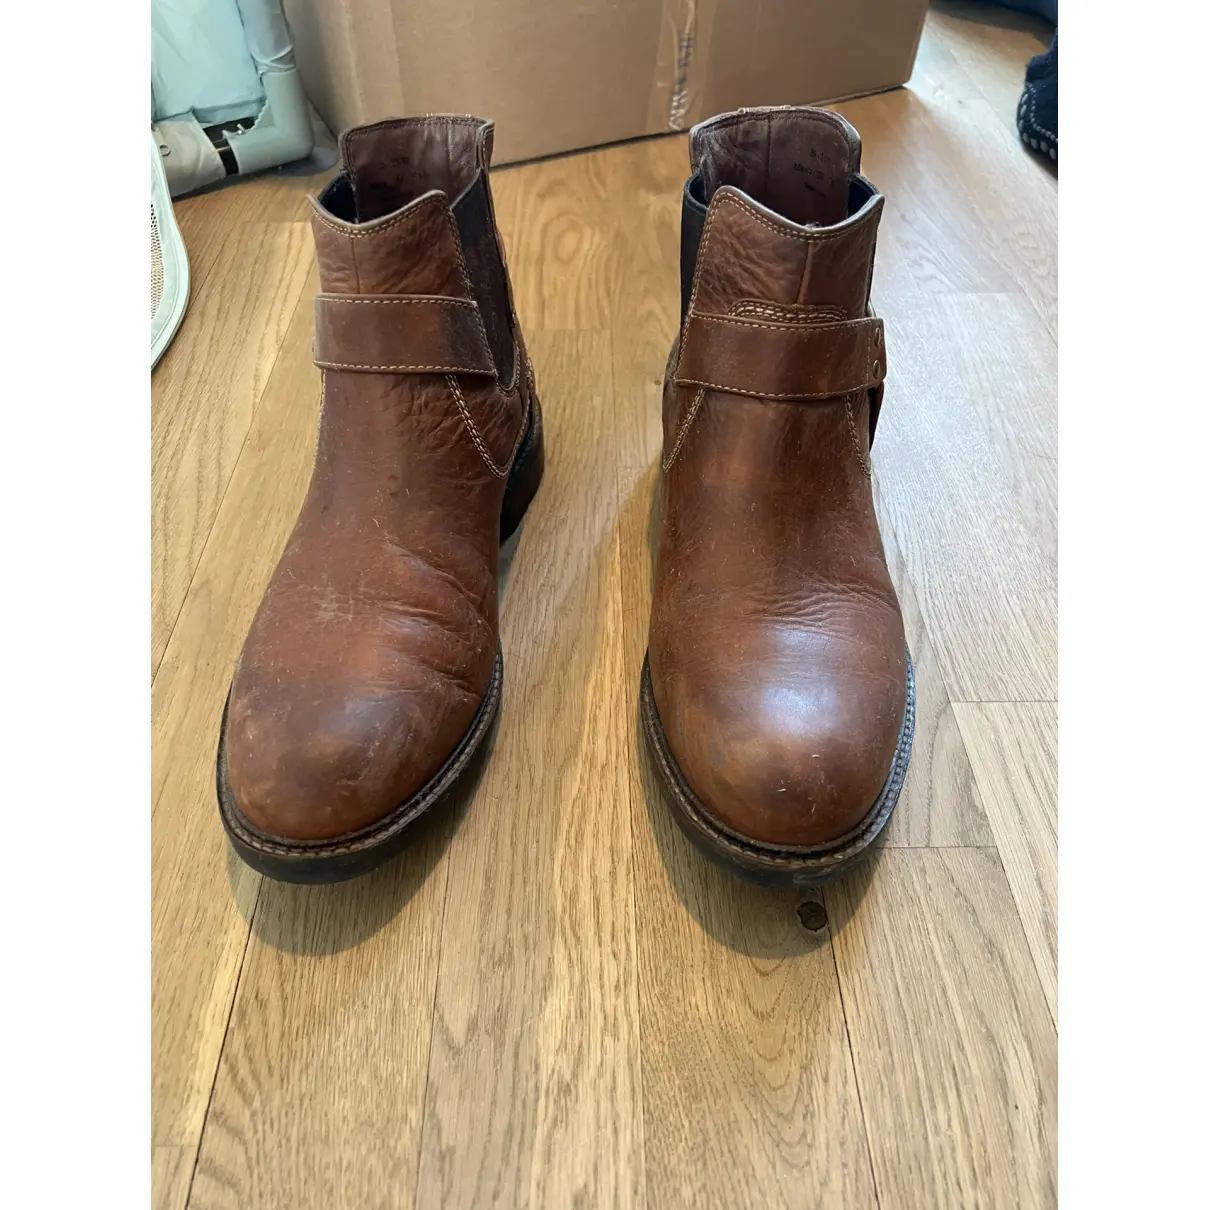 Buy Johnston And Murphy Leather boots online